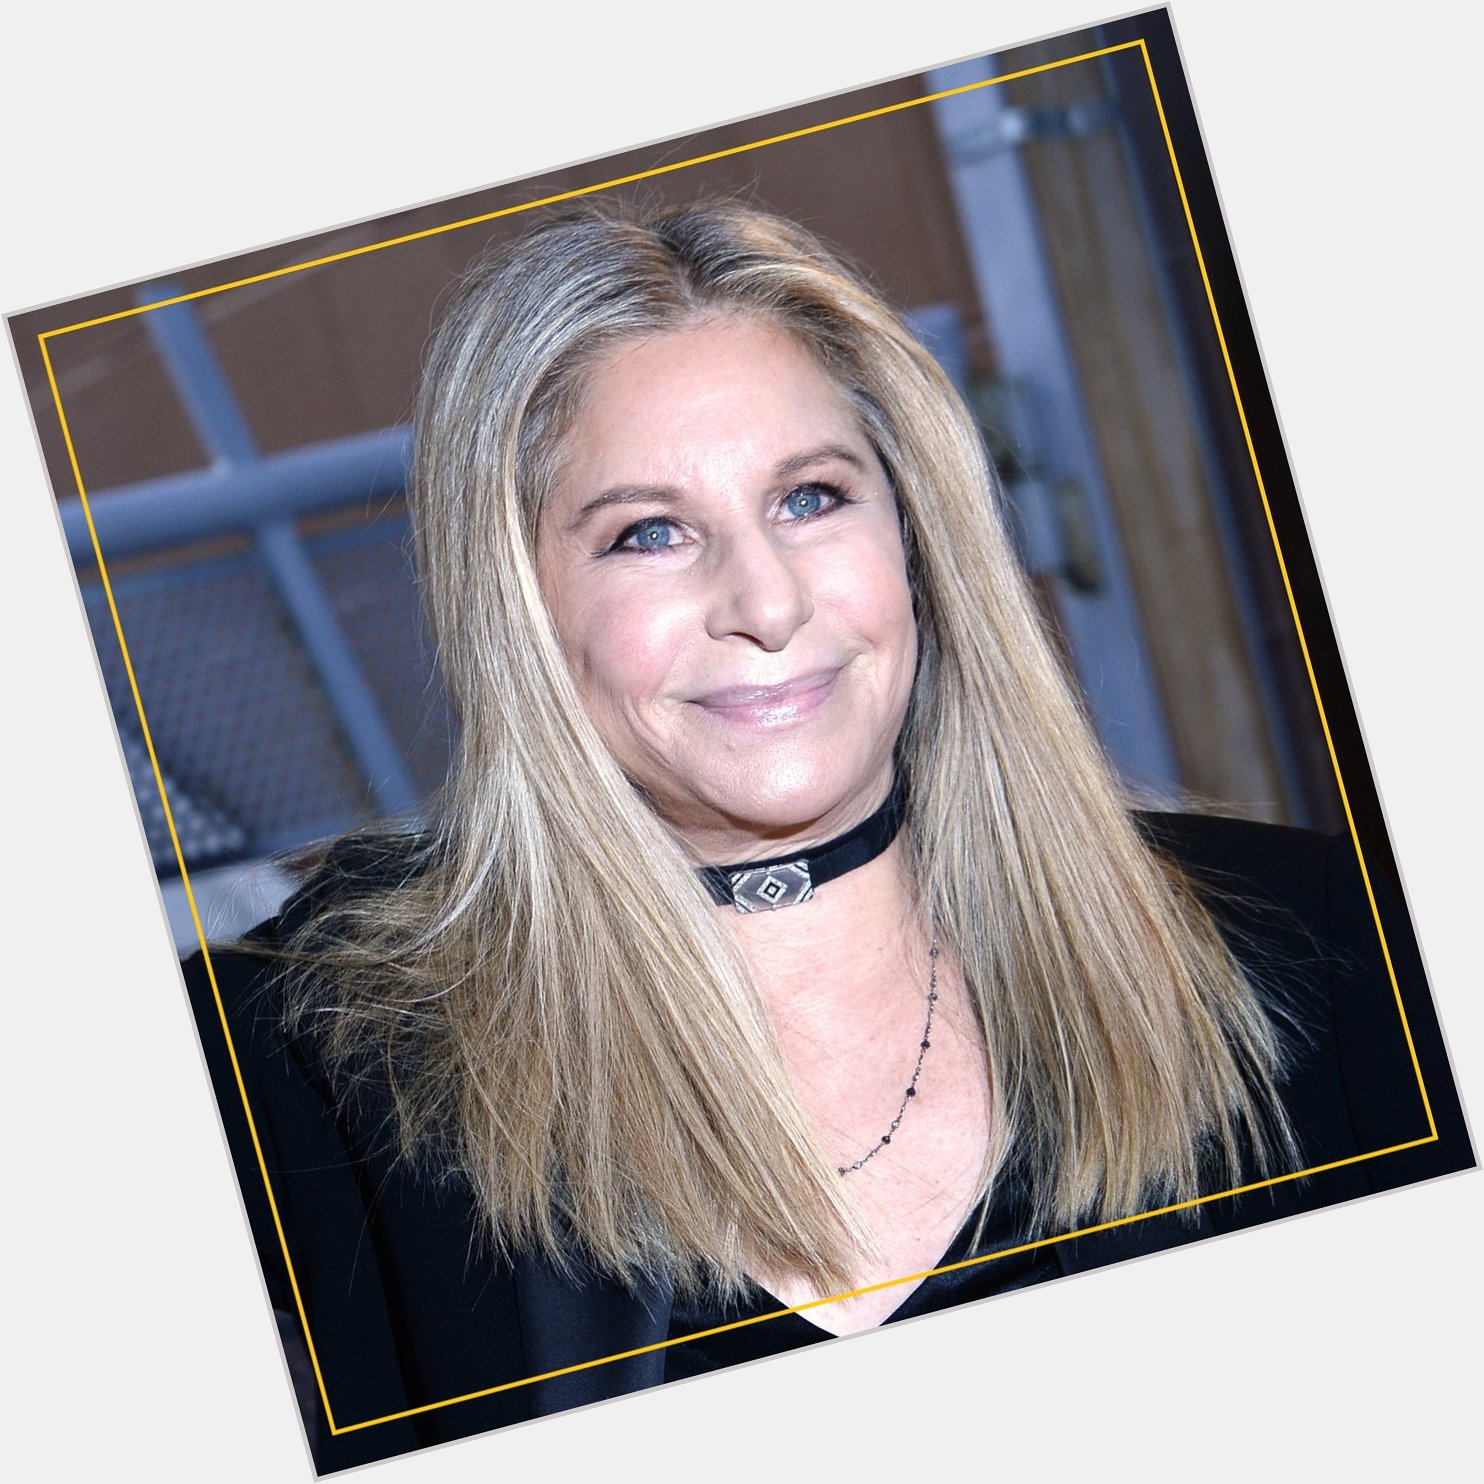 Wishing the sensational Barbra Streisand a very happy birthday! What\s your favourite song or movie of hers? 